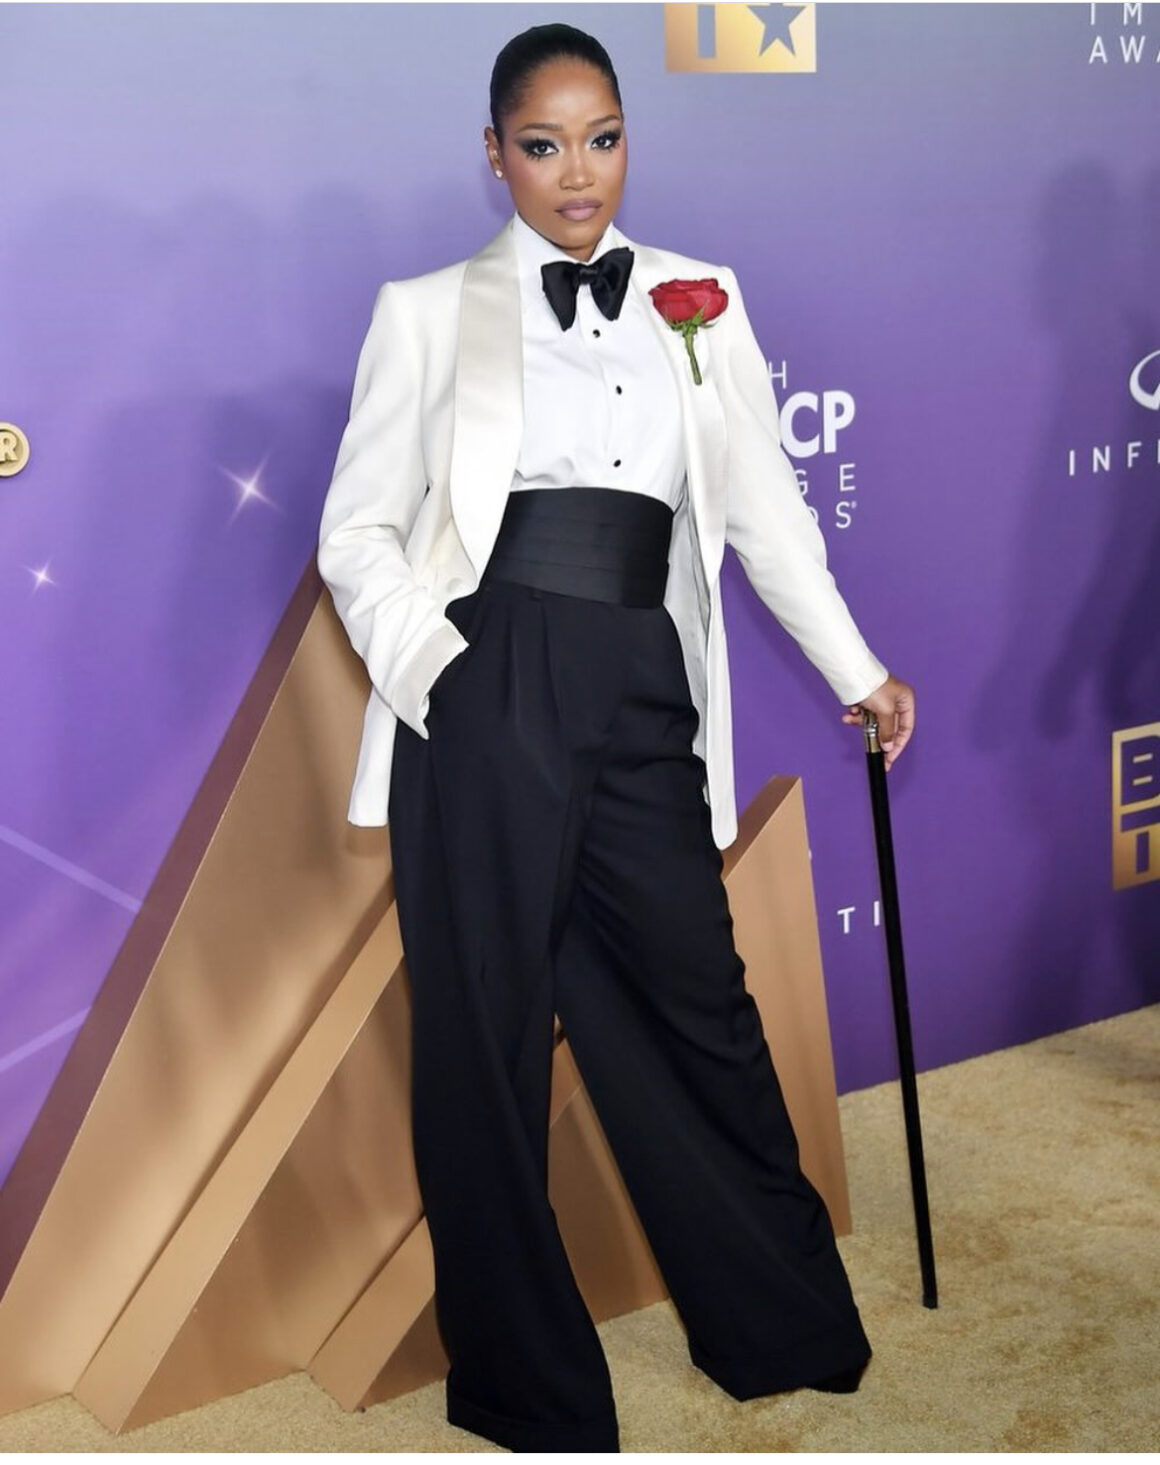 On the Scene at the 55th NAACP Image Awards Fantasia in Custom Mono Halley Bailey in Nicole Felicia Couture Tara Henson in Declare Tisha Campbell Martin in AnRfashions and More 10